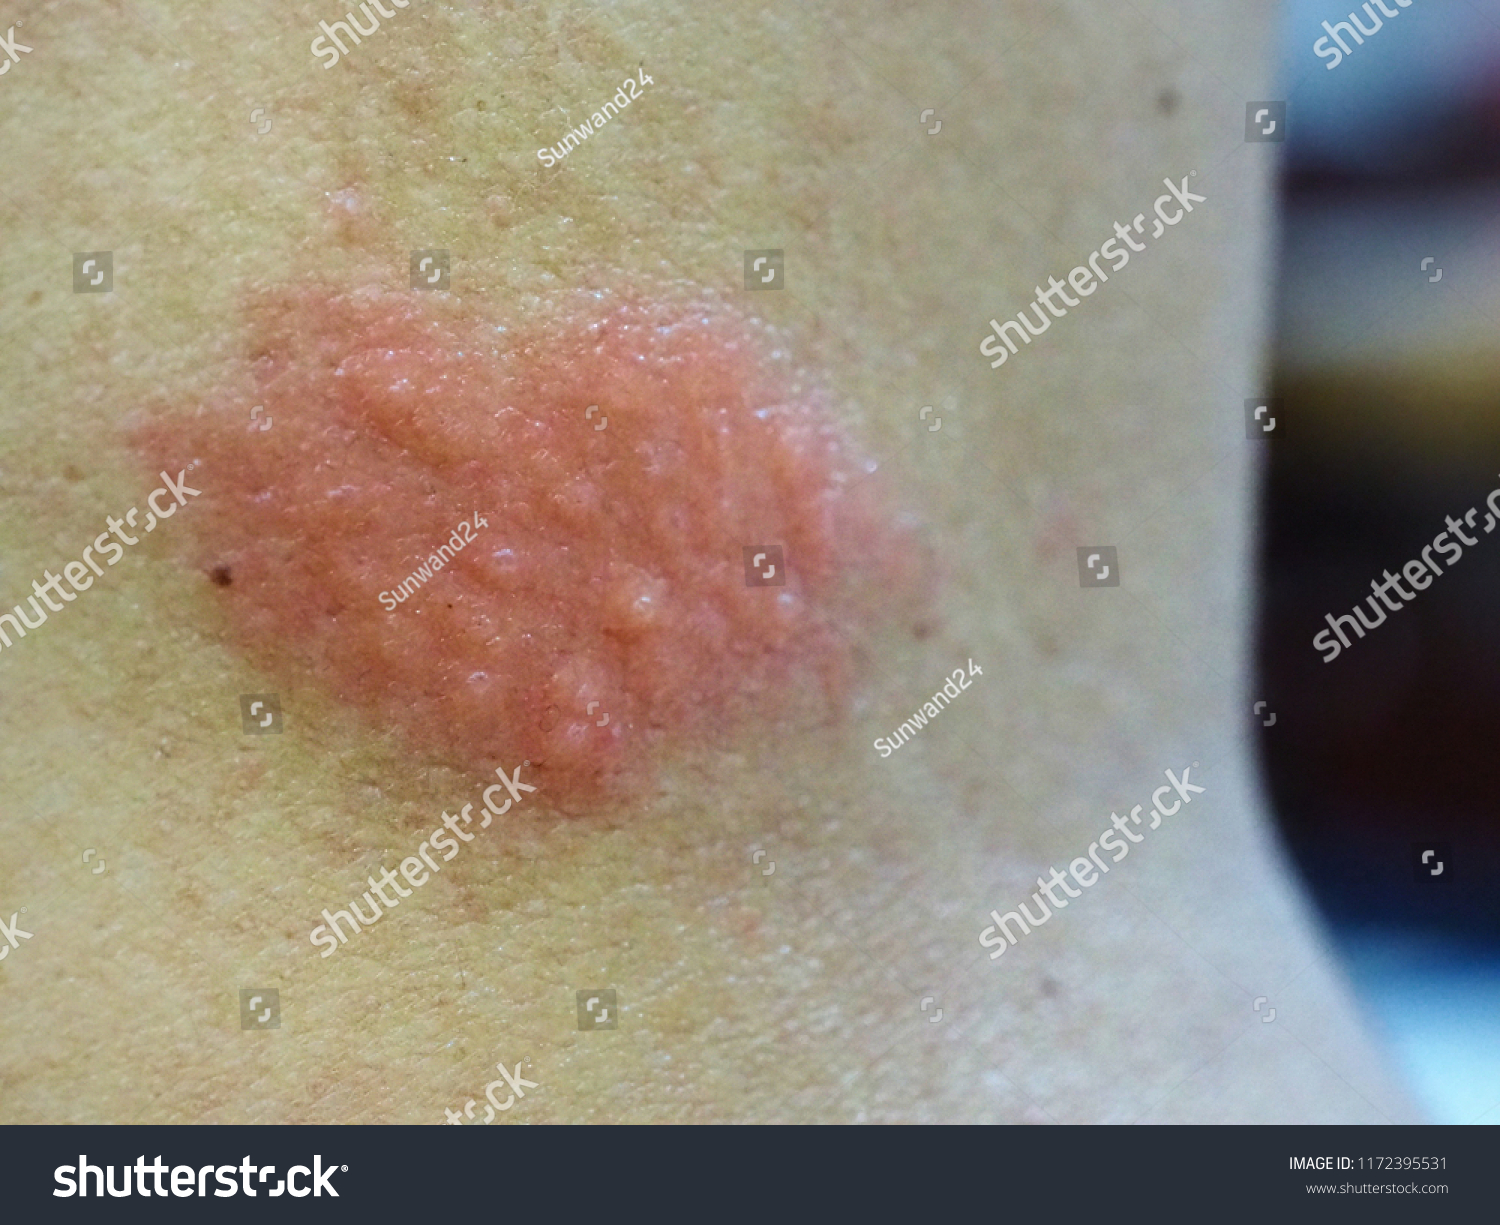 Bacterial Skin Infection Cause Widespread Red Stock Photo (Edit Now